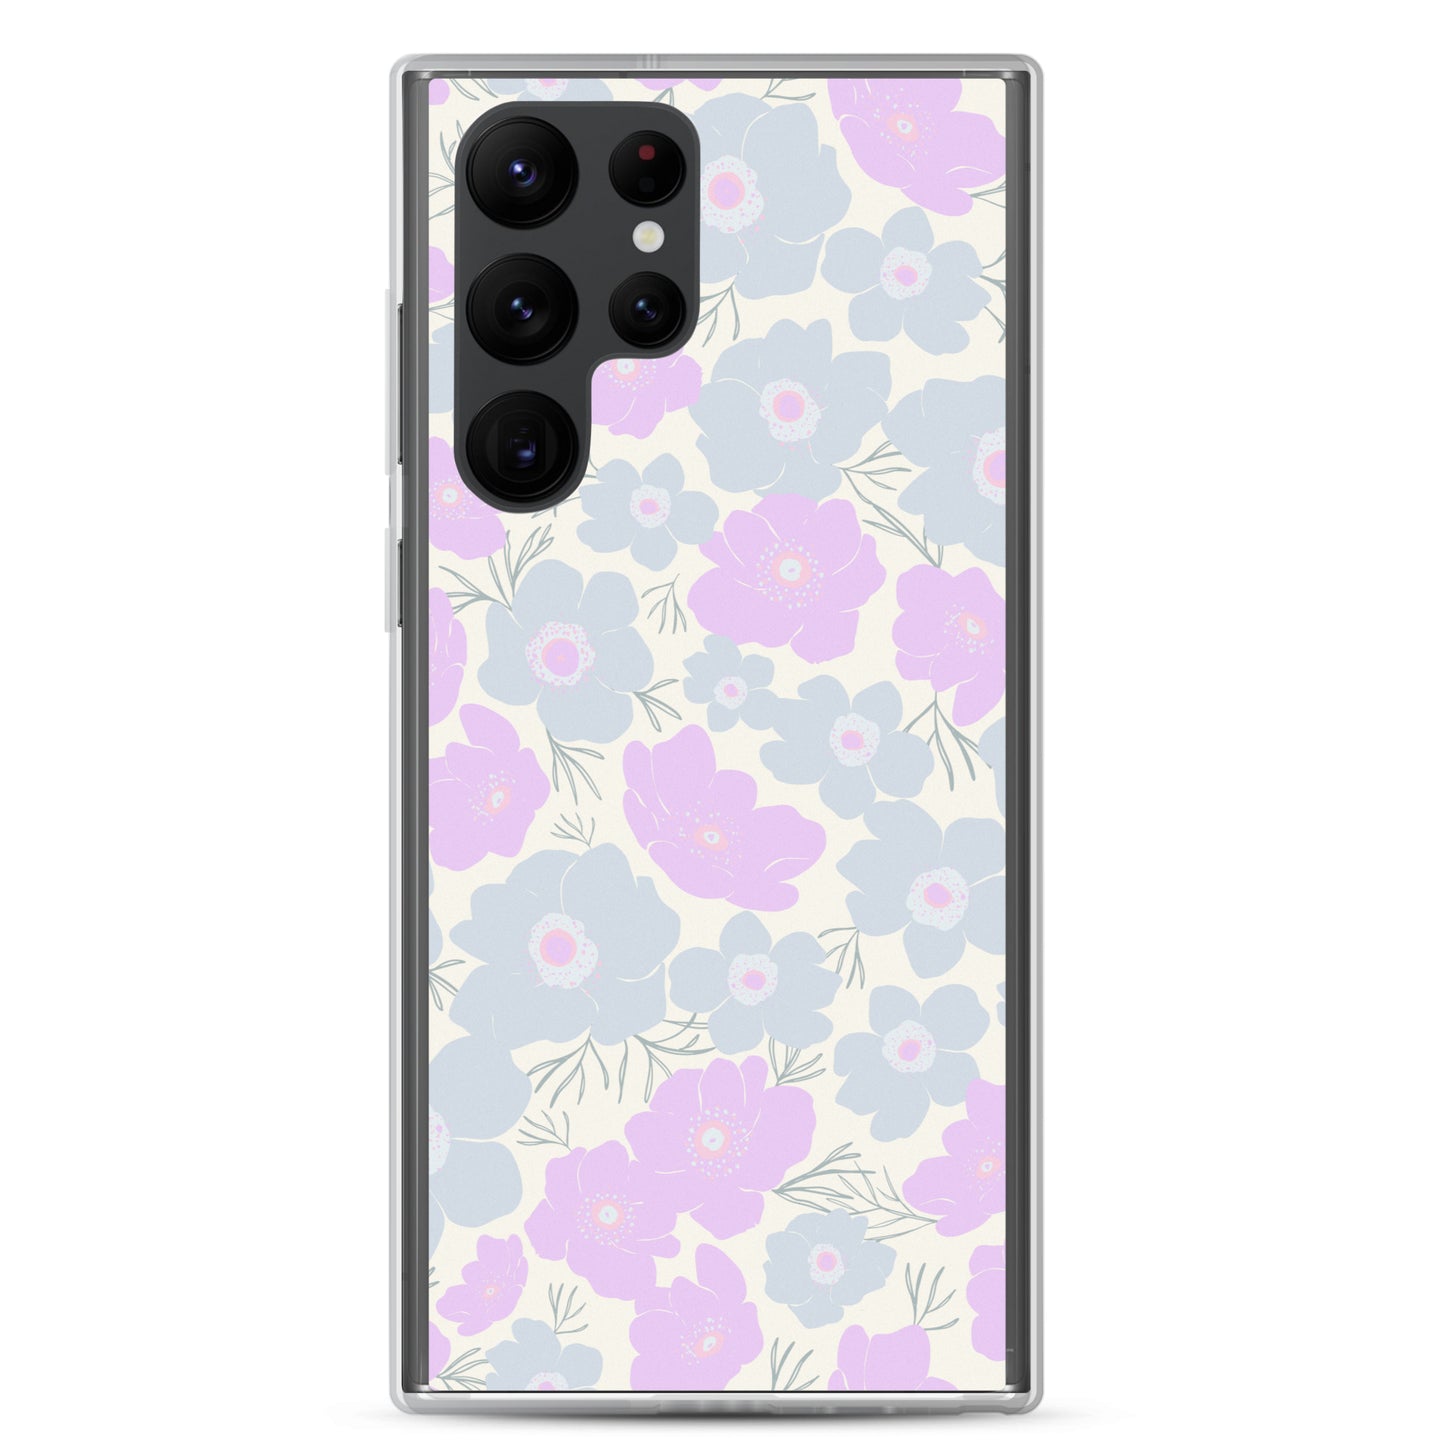 Pastel Floral - Sustainably Made Samsung Case